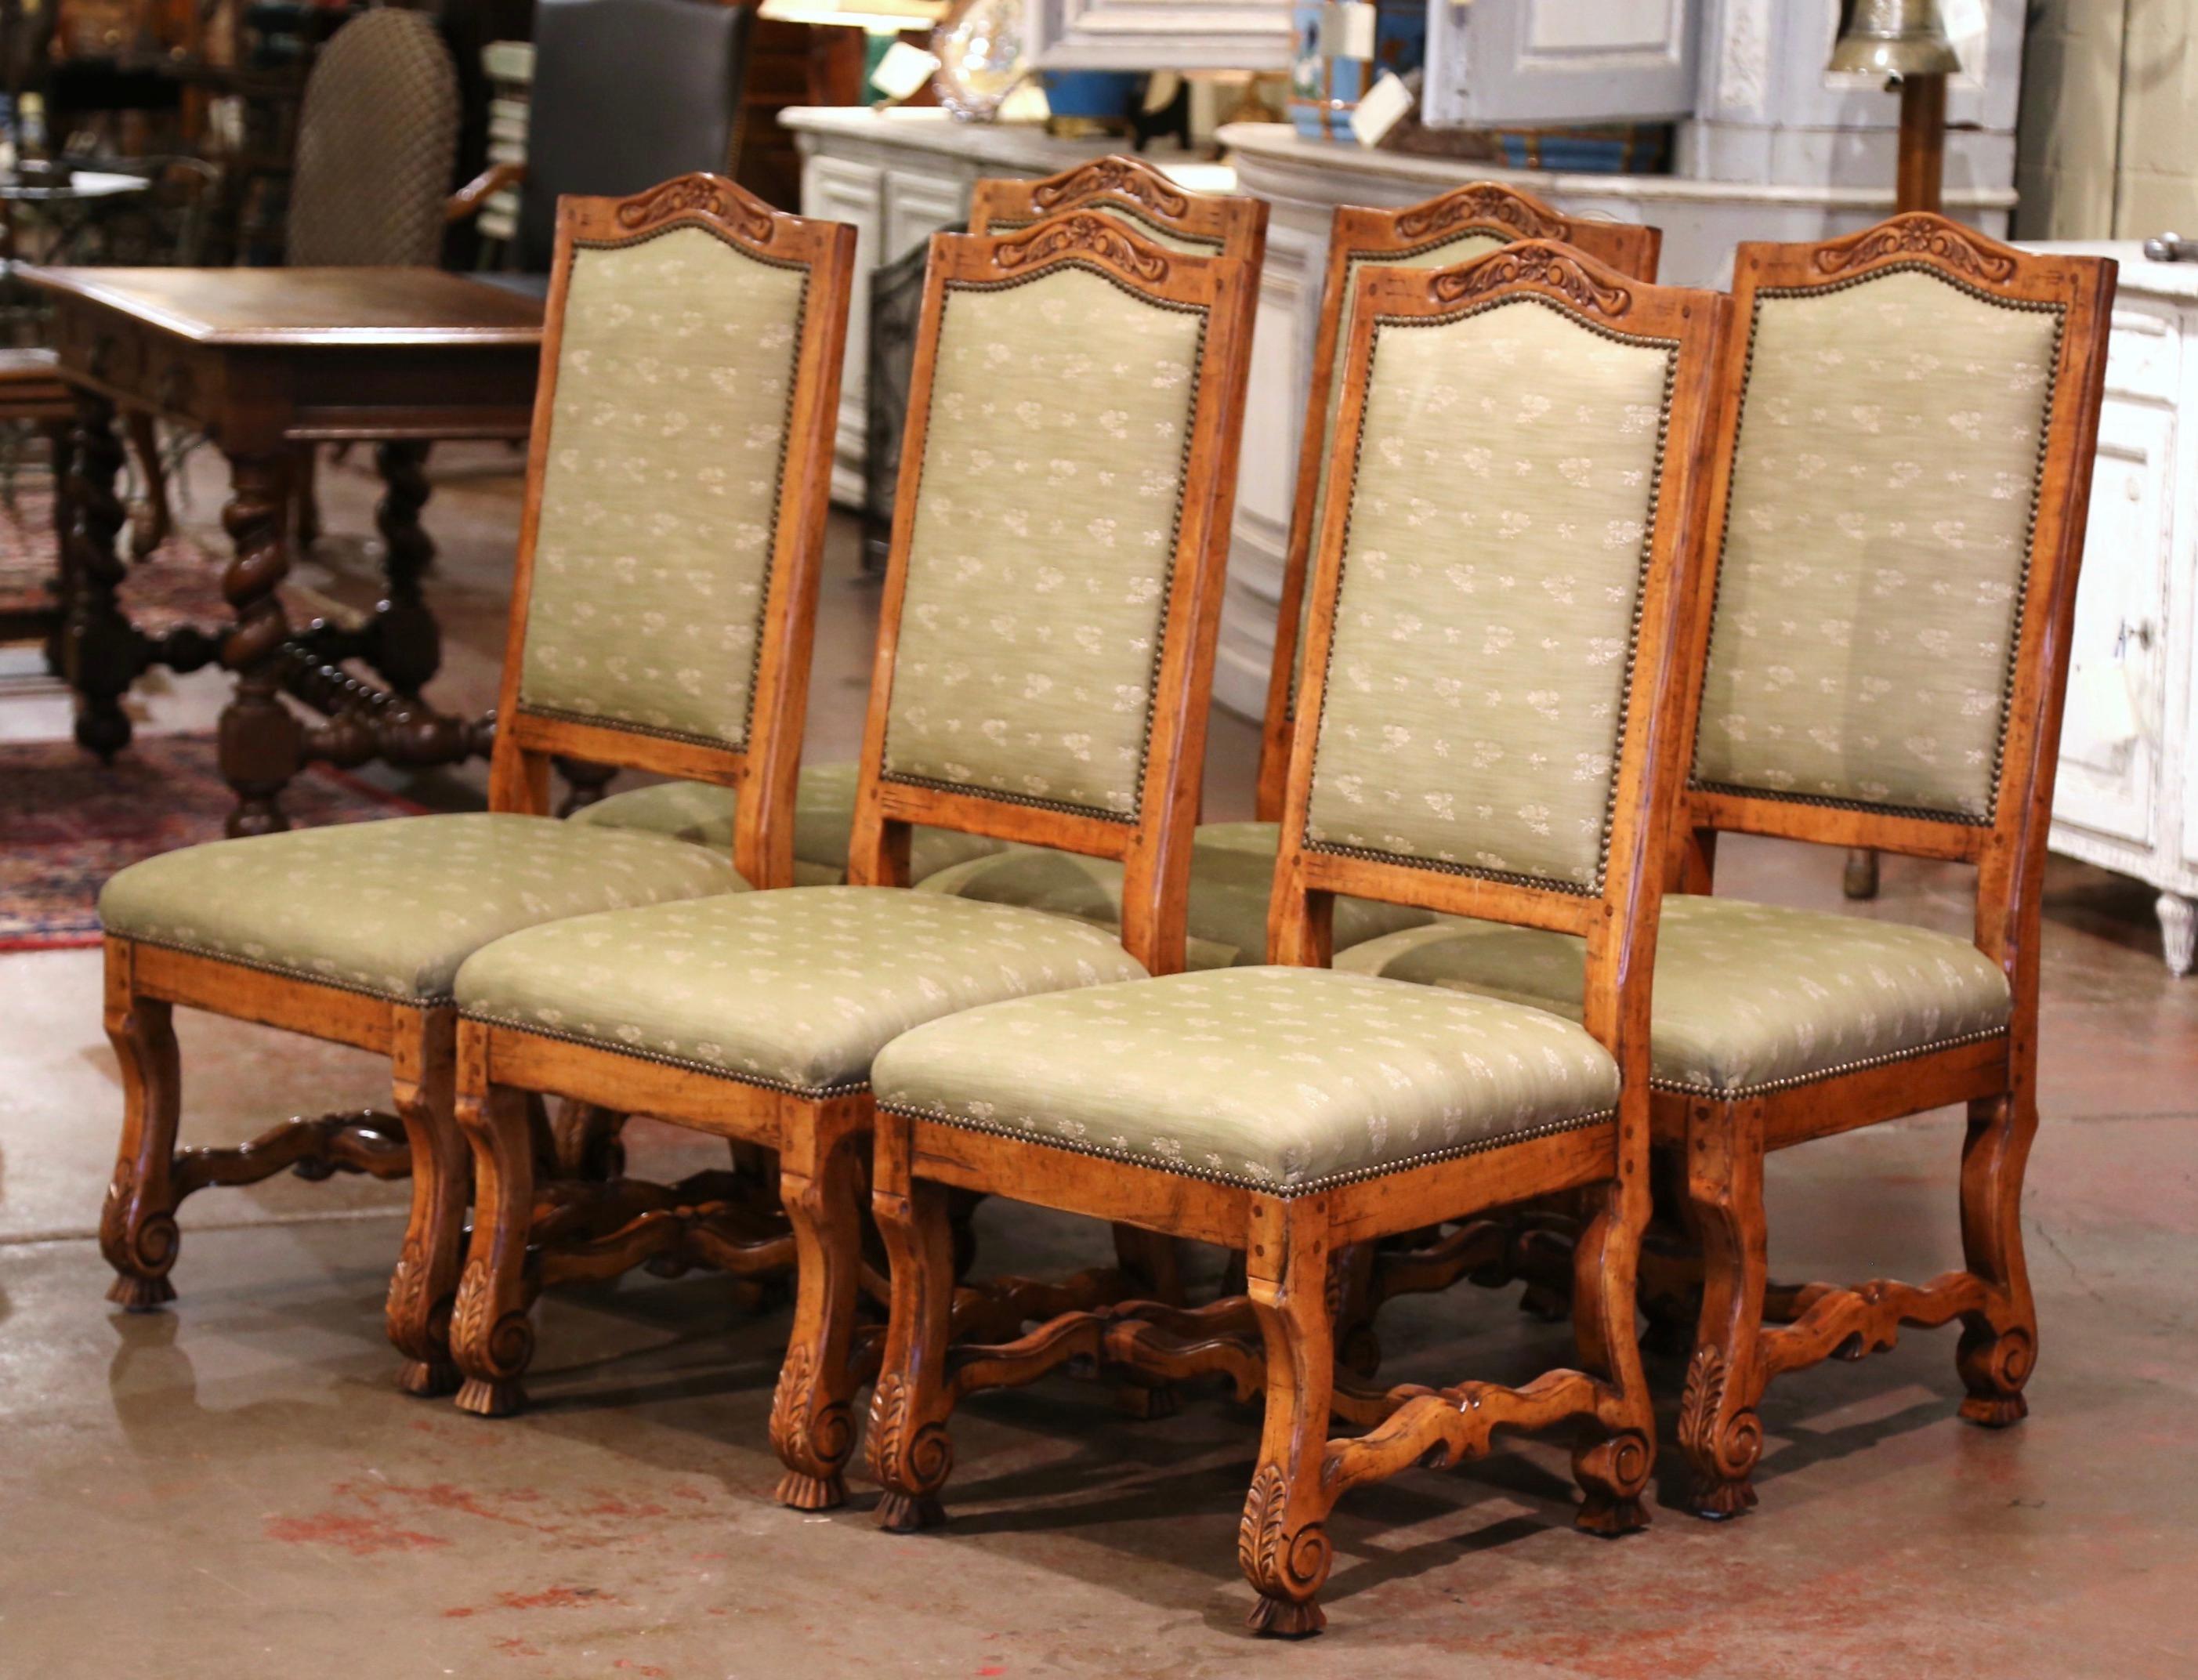 Place this elegant suite of six side chairs around your breakfast table for a true country French look. Crafted circa 1990 in the Louis XIII style, each chair stands on scrolled legs ending with bone feet over a scalloped bottom stretcher; the chair